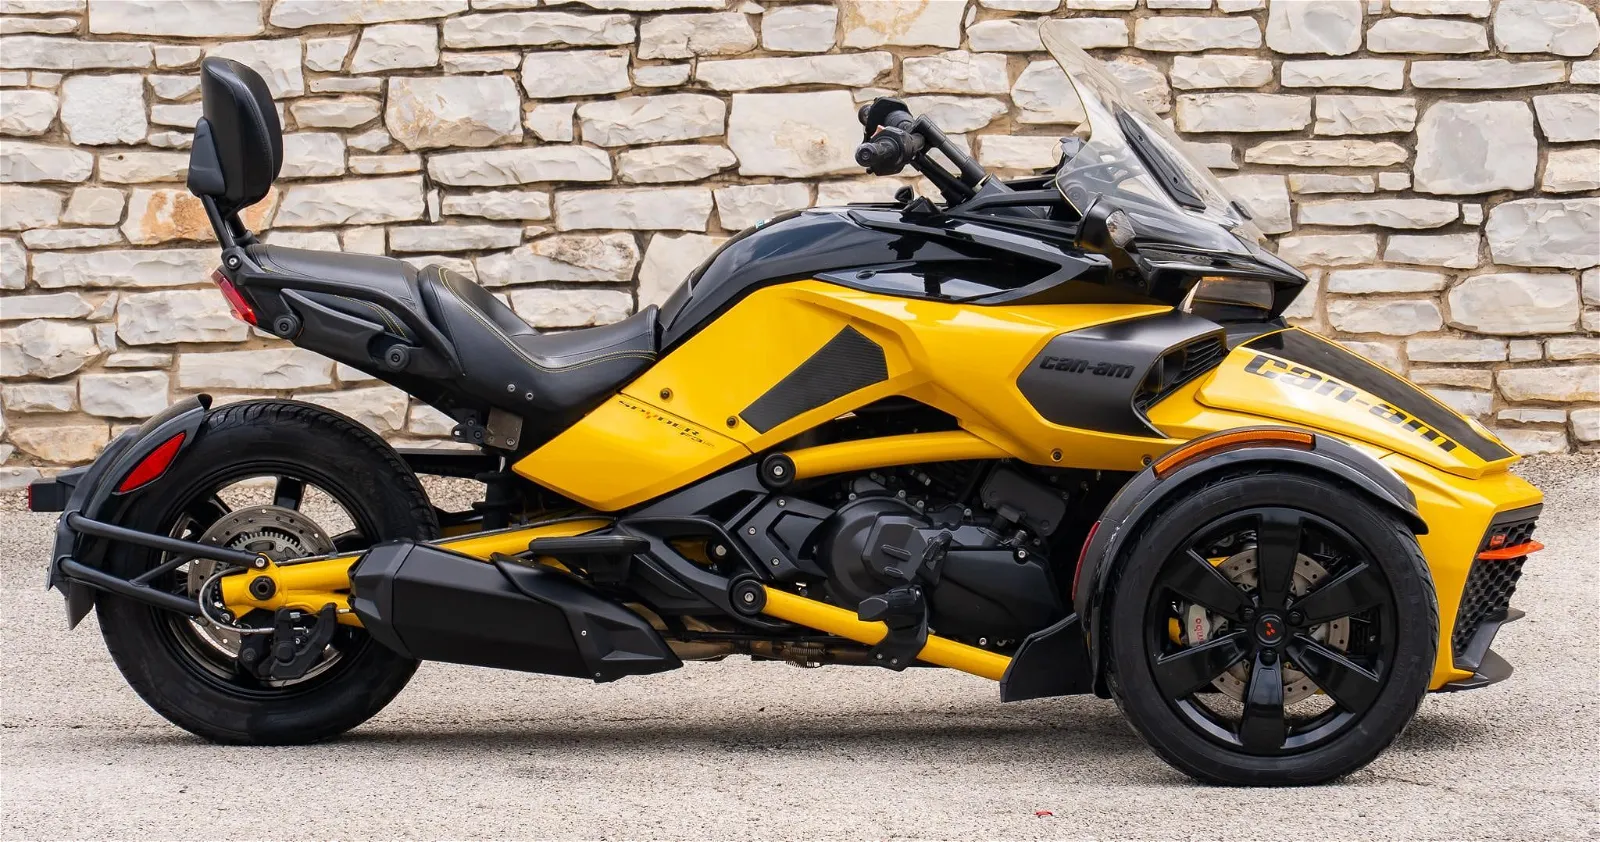 2017 Can-Am Spyder F3S